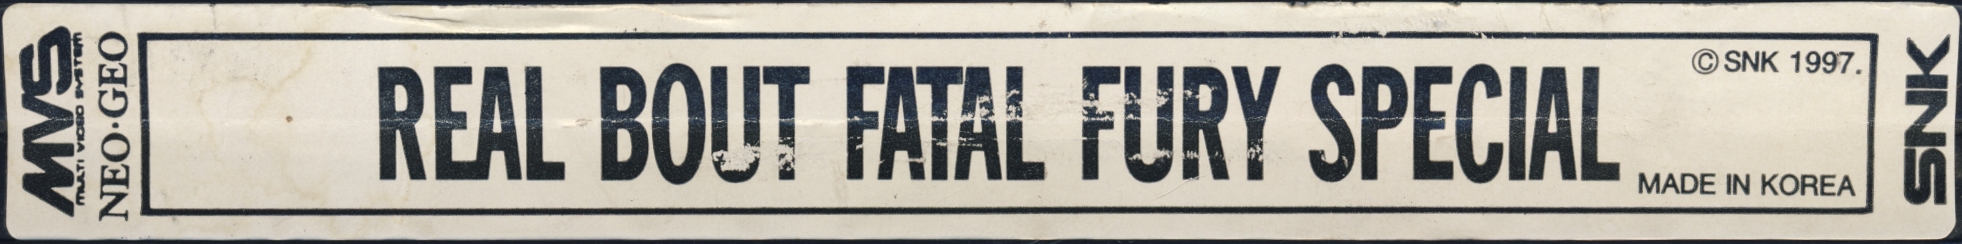 Real bout fatal fury special kr label.jpg